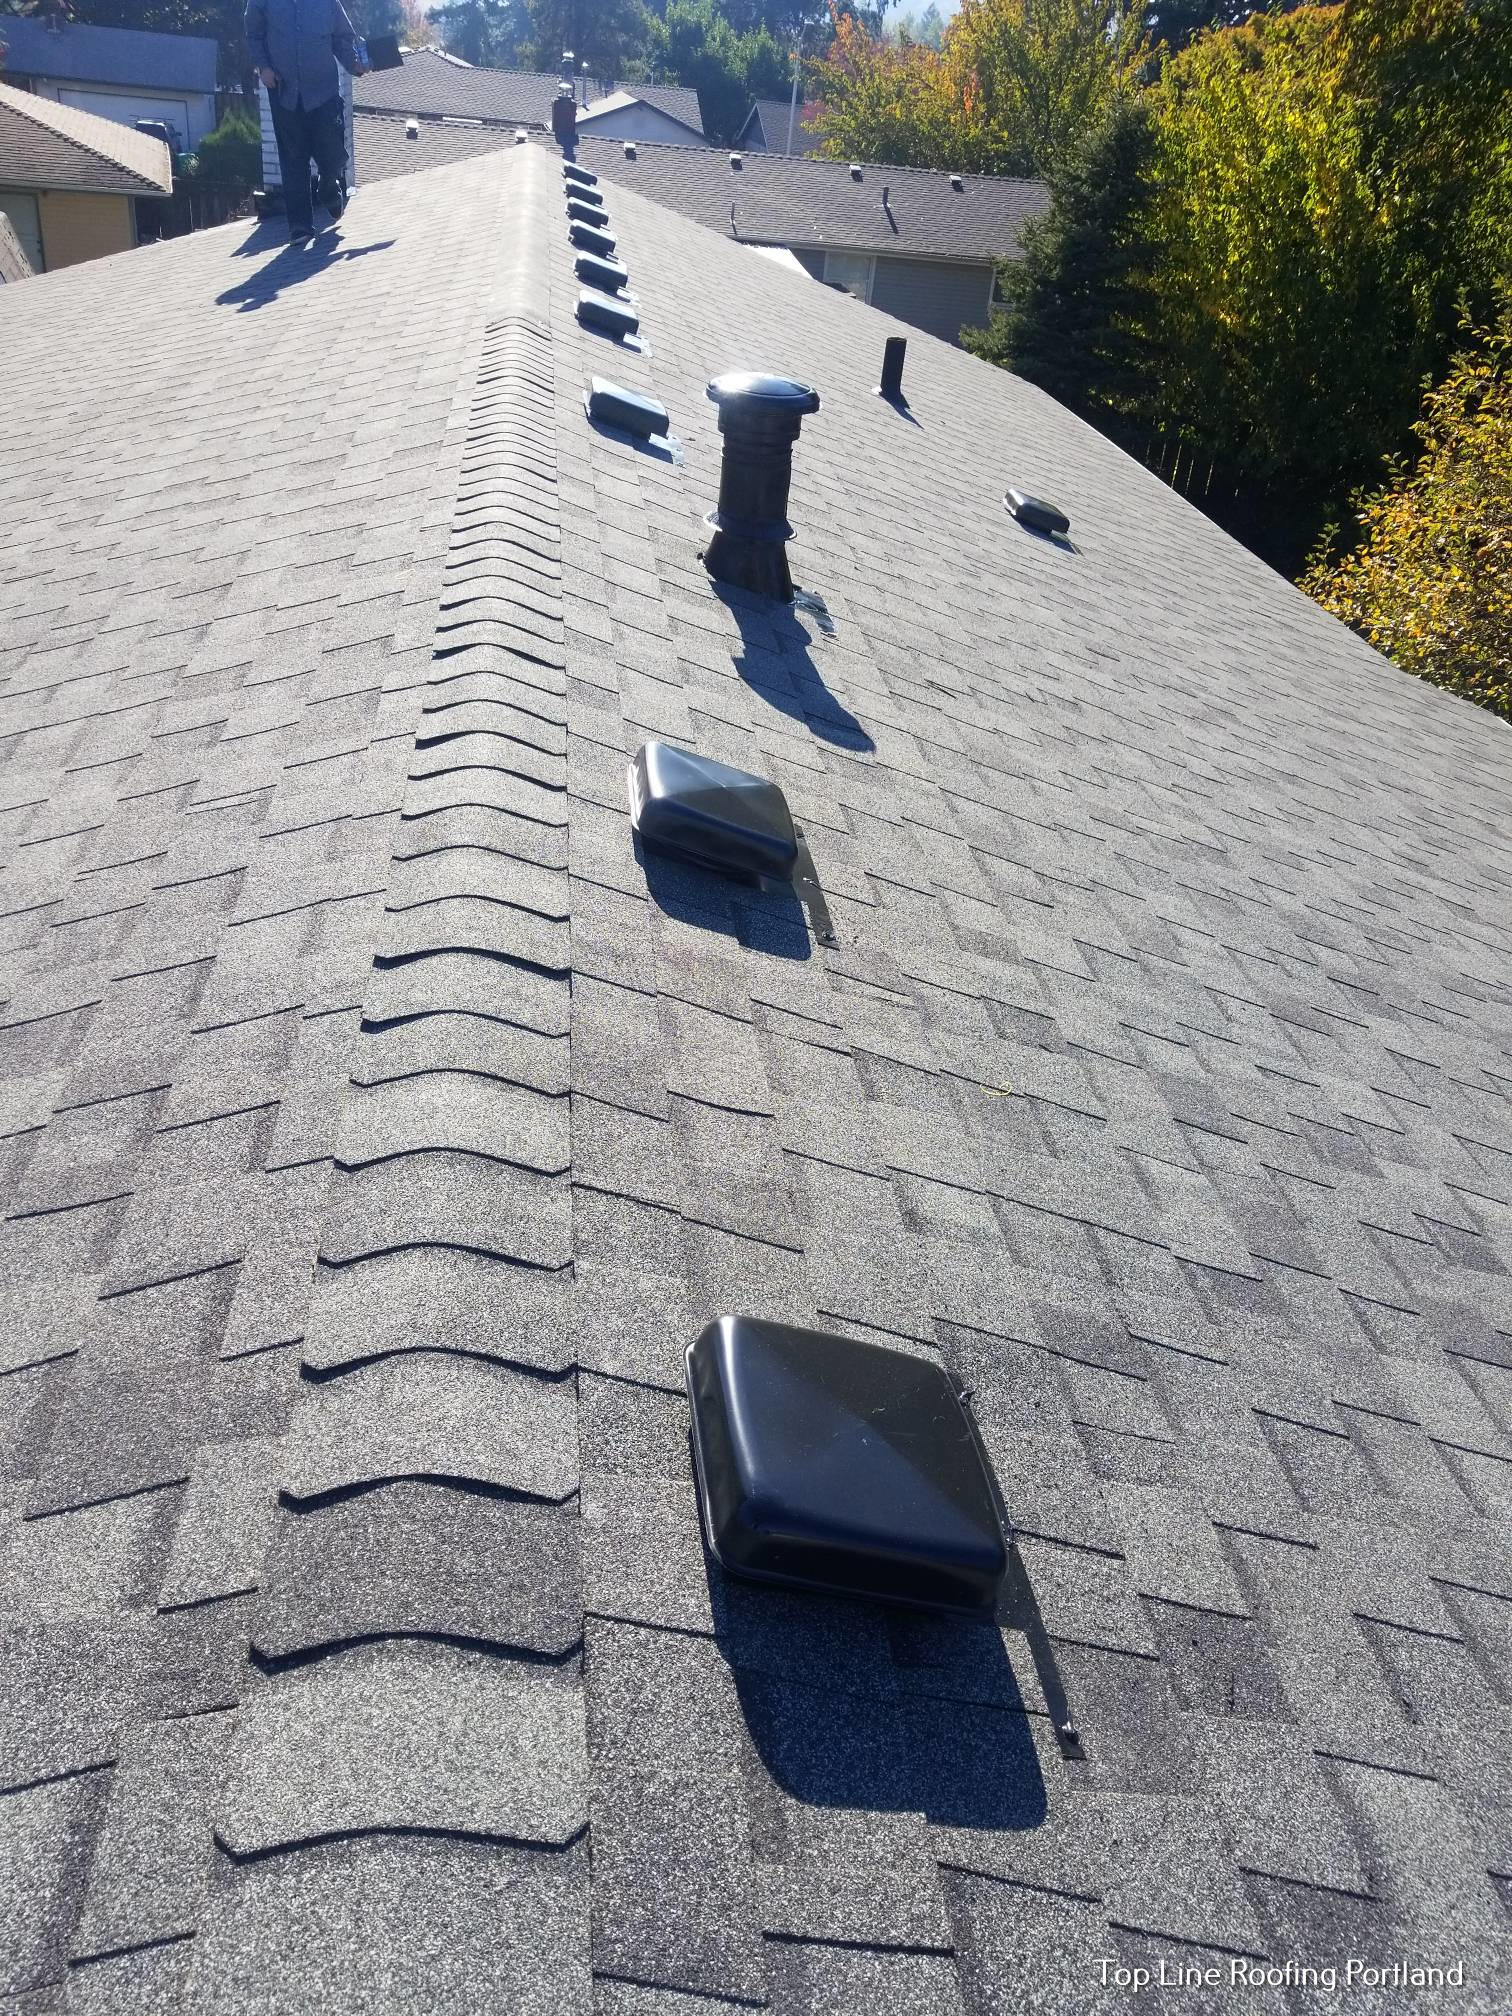 Top Line Roofing Contractors Explains the Services It Offers in Portland